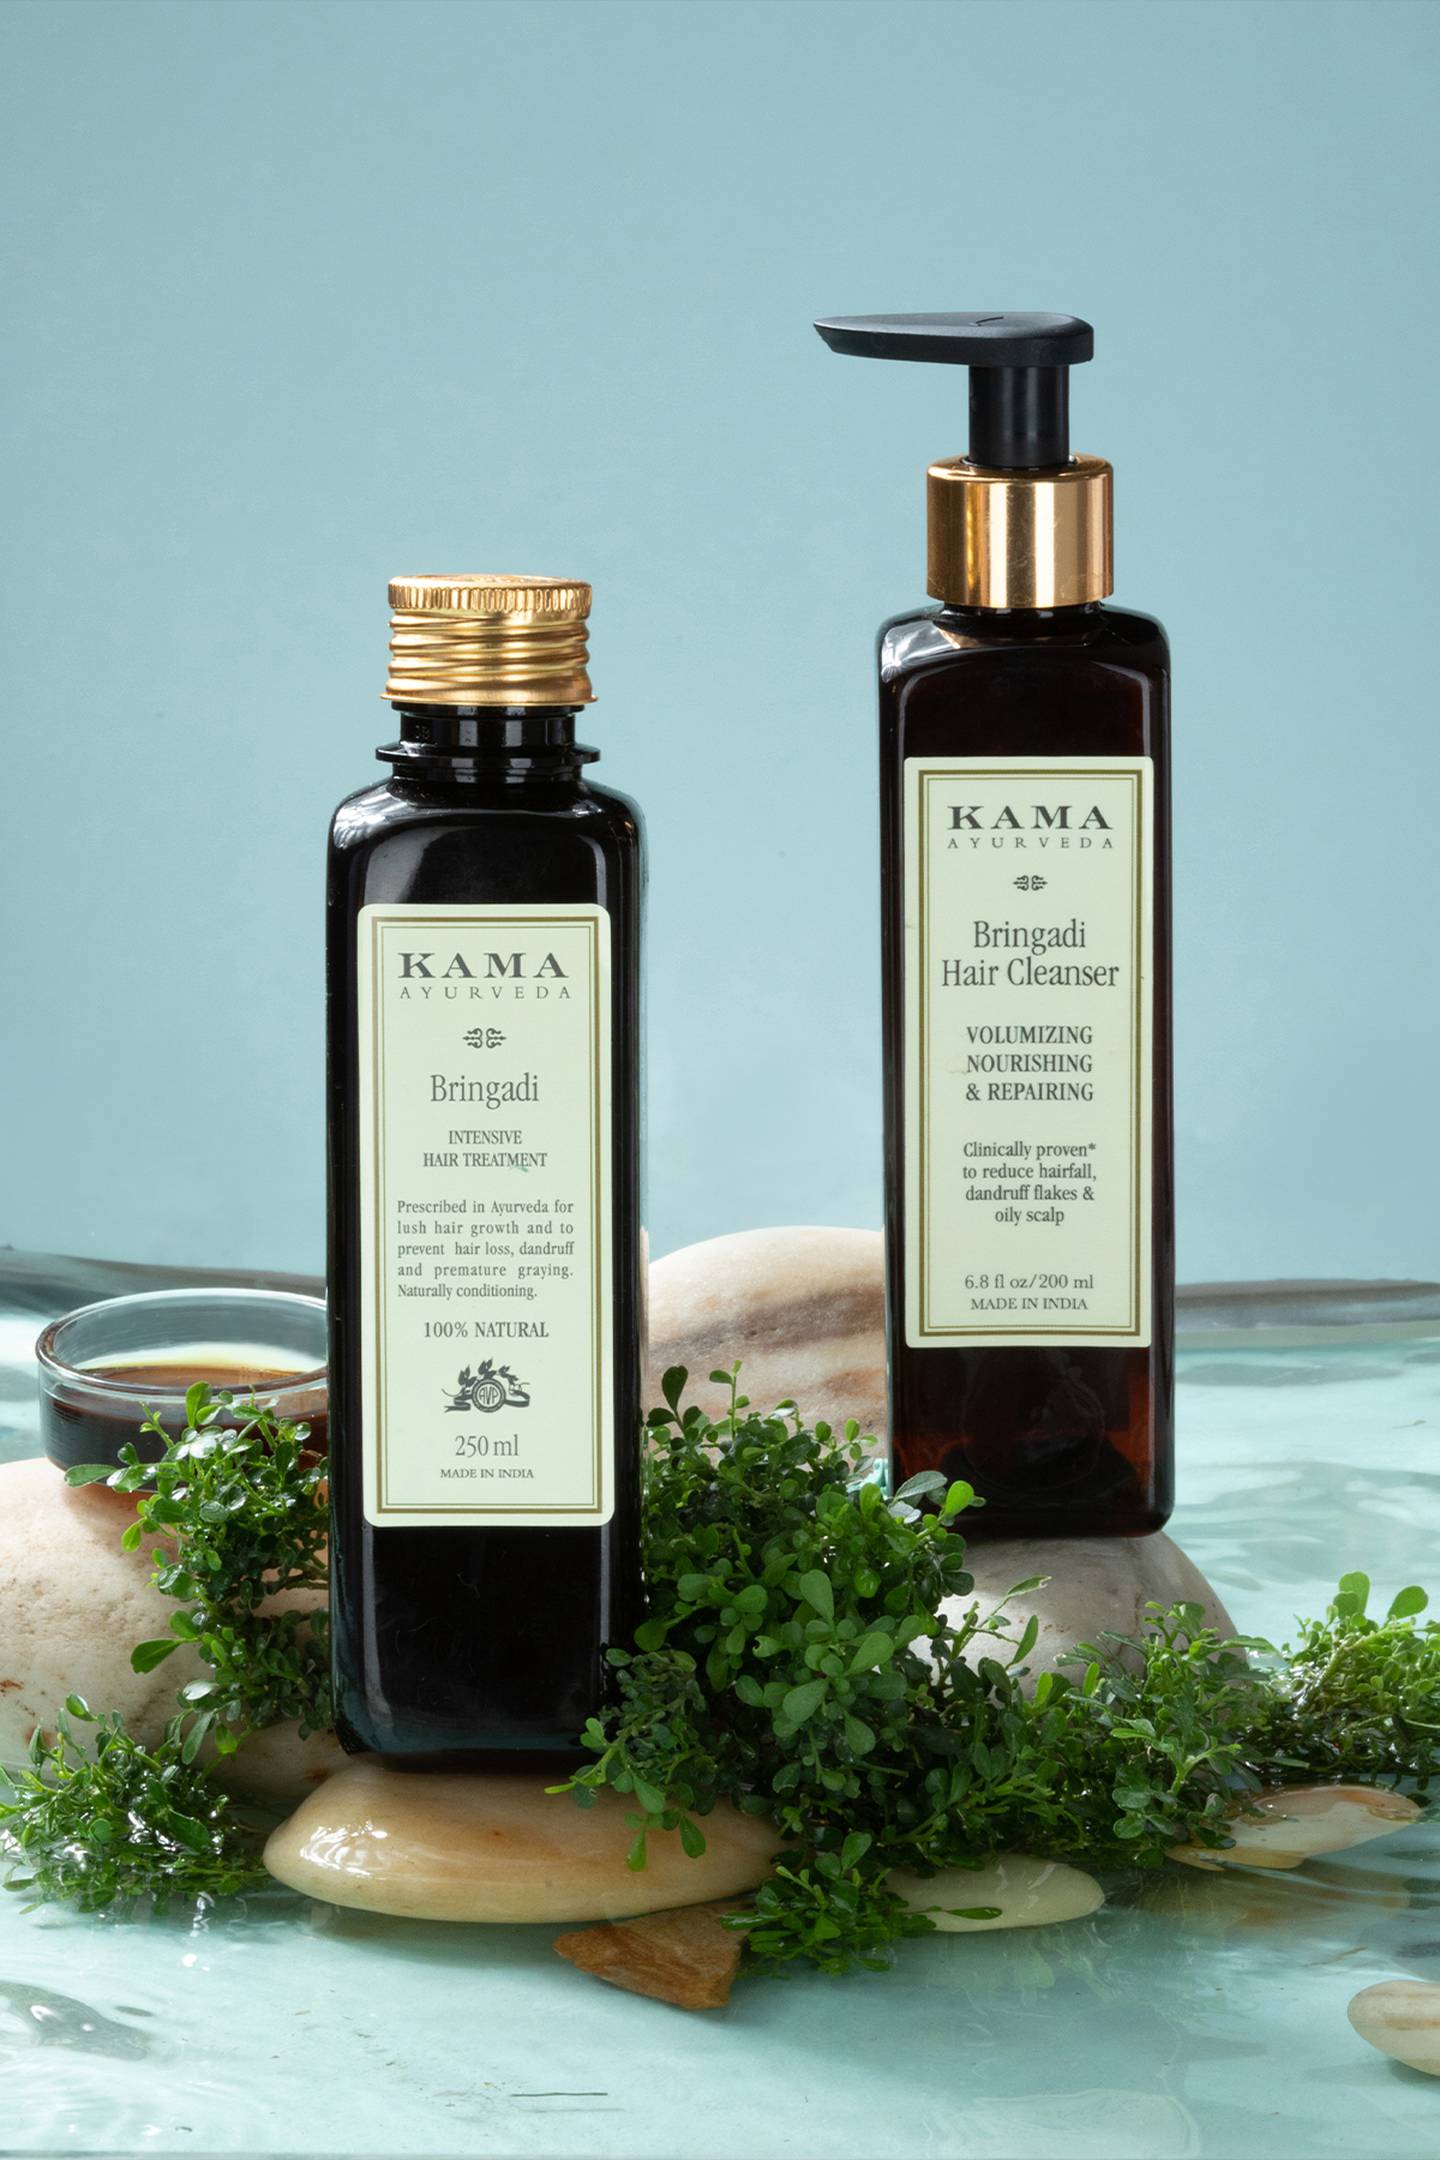 Kama Ayurveda, which saw a reported minority investment of 100 crore rupees (approximately $14 million) by Spanish fashion and fragrance conglomerate Puig in 2019, is also positive about expanding into the UK market. Kama Ayurveda.